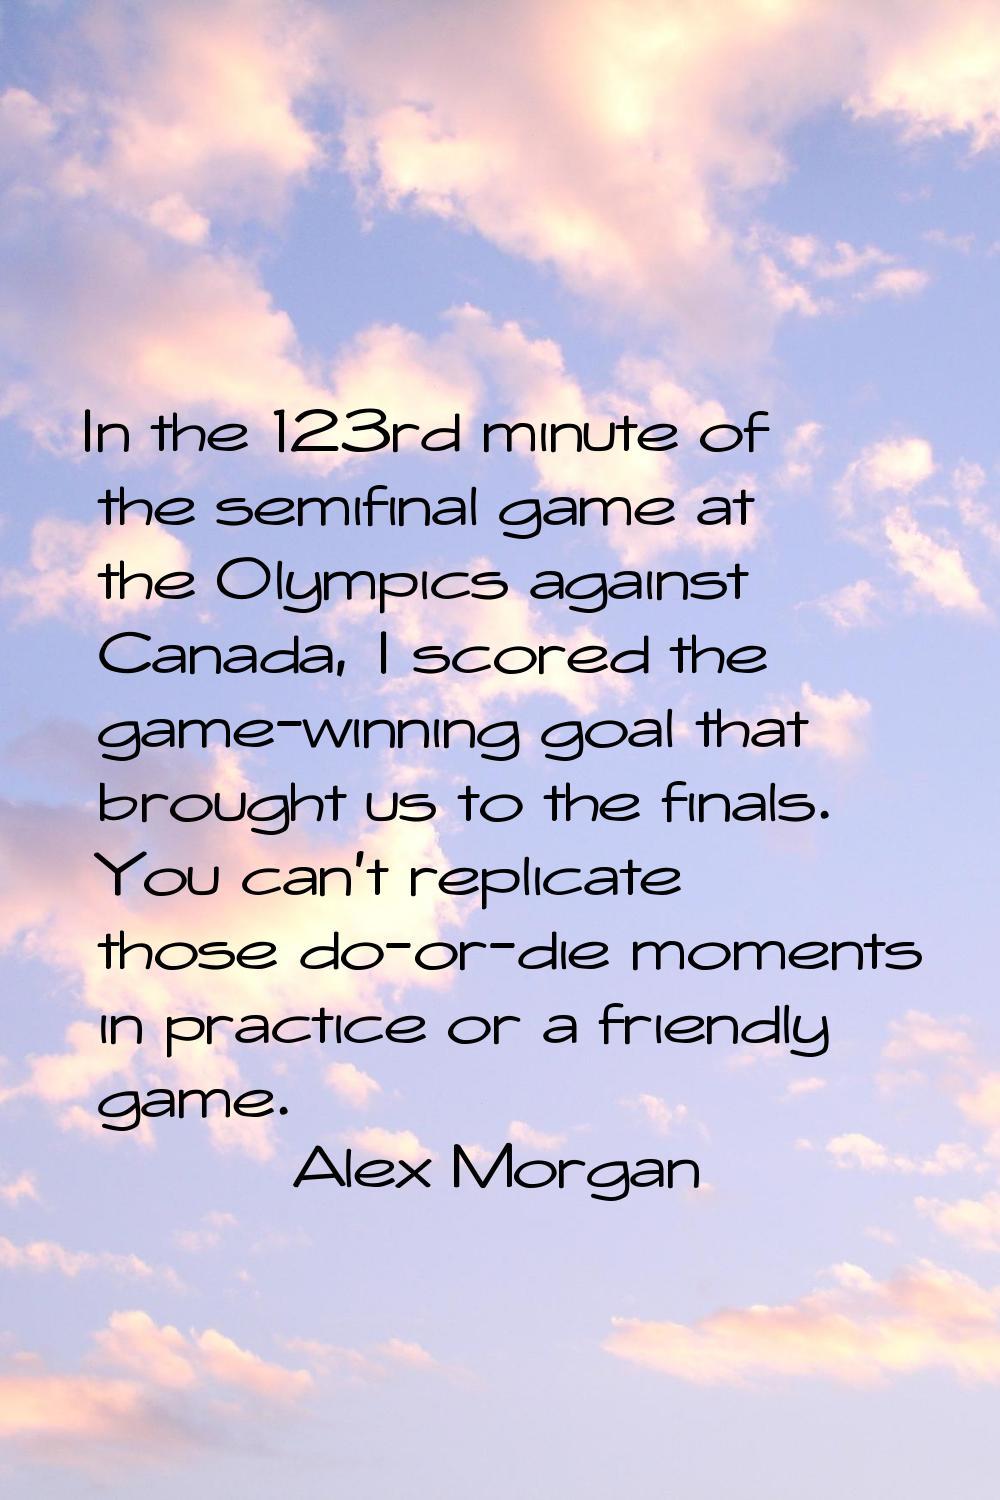 In the 123rd minute of the semifinal game at the Olympics against Canada, I scored the game-winning